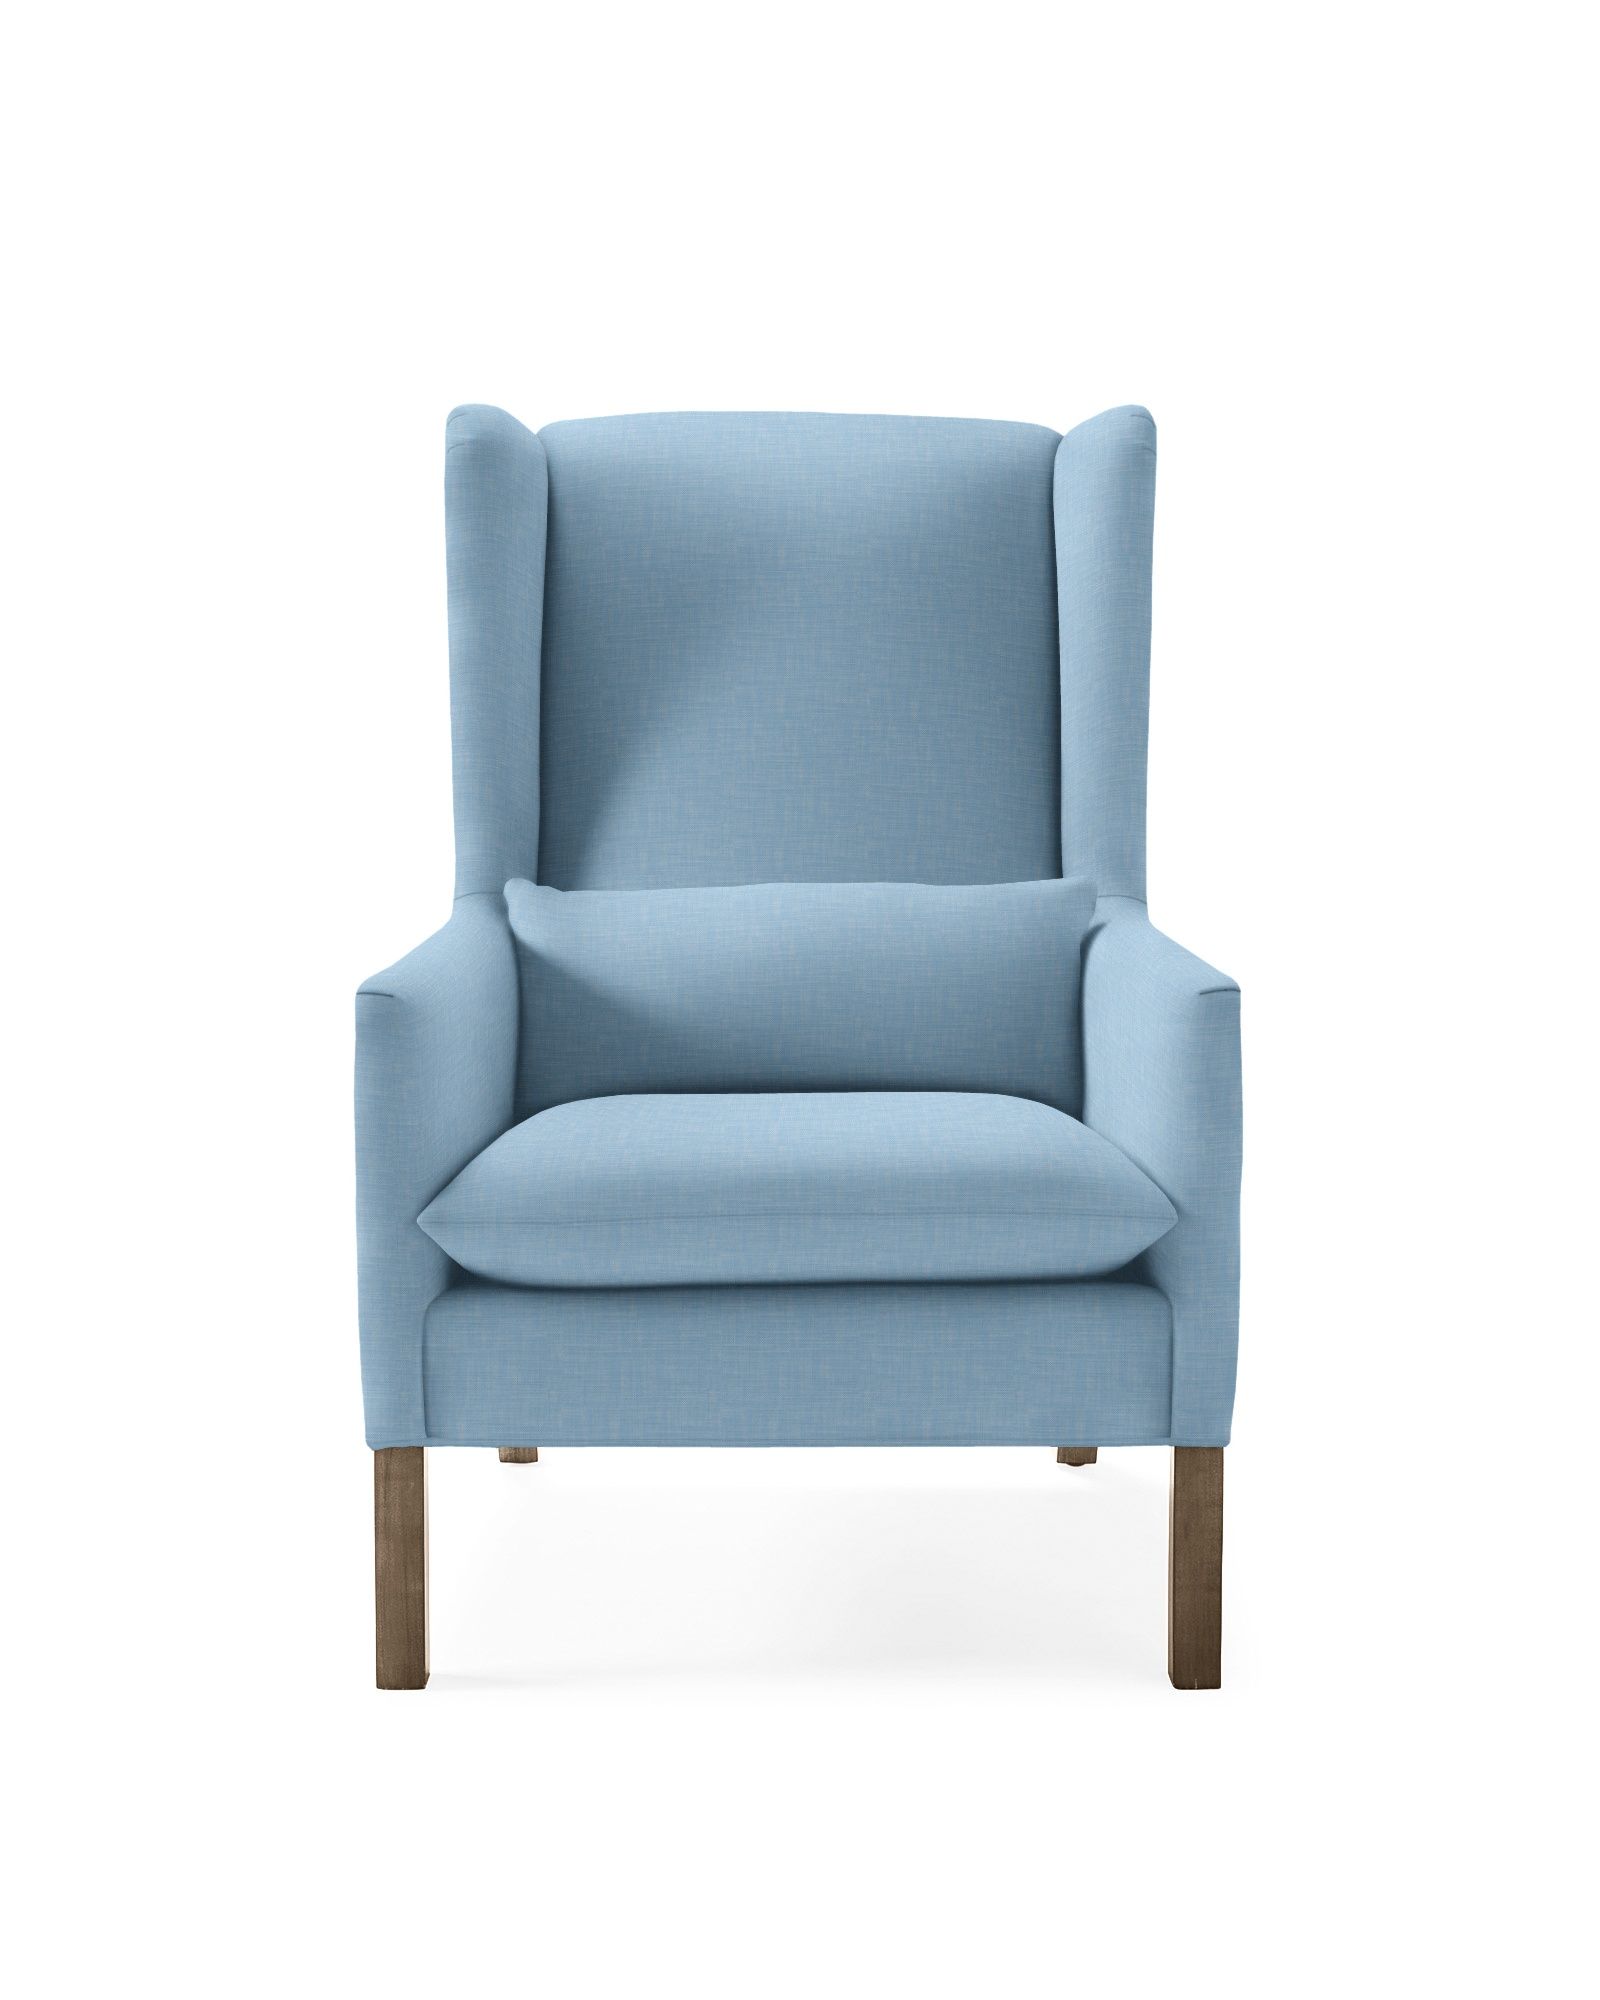 Sussex Wing Back Chair | Serena and Lily